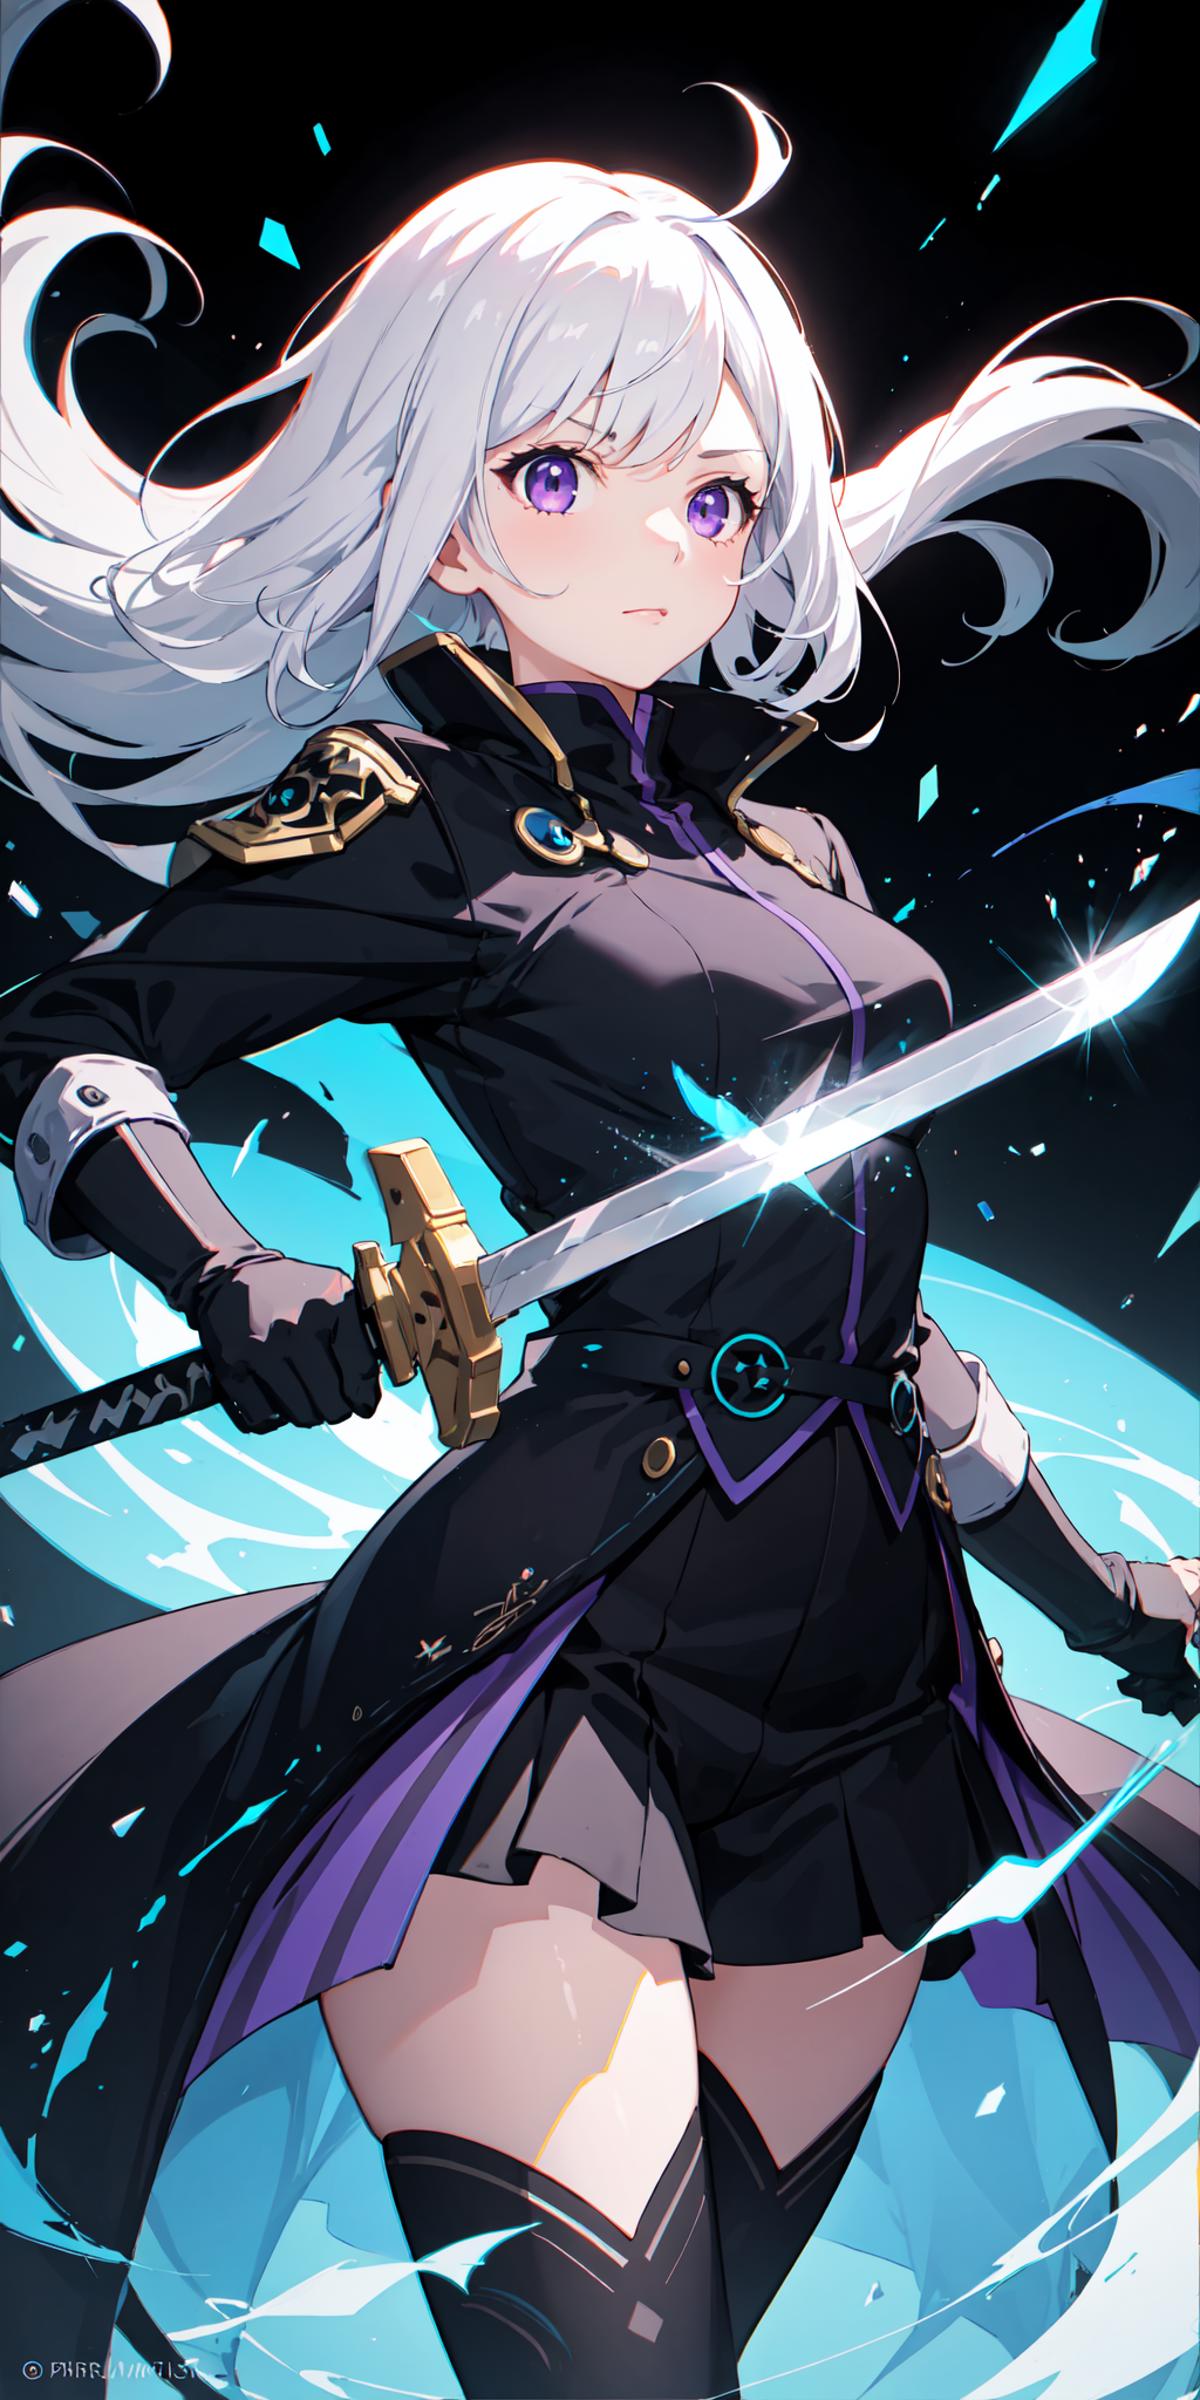 Anime character holding a sword and wearing a black jacket.